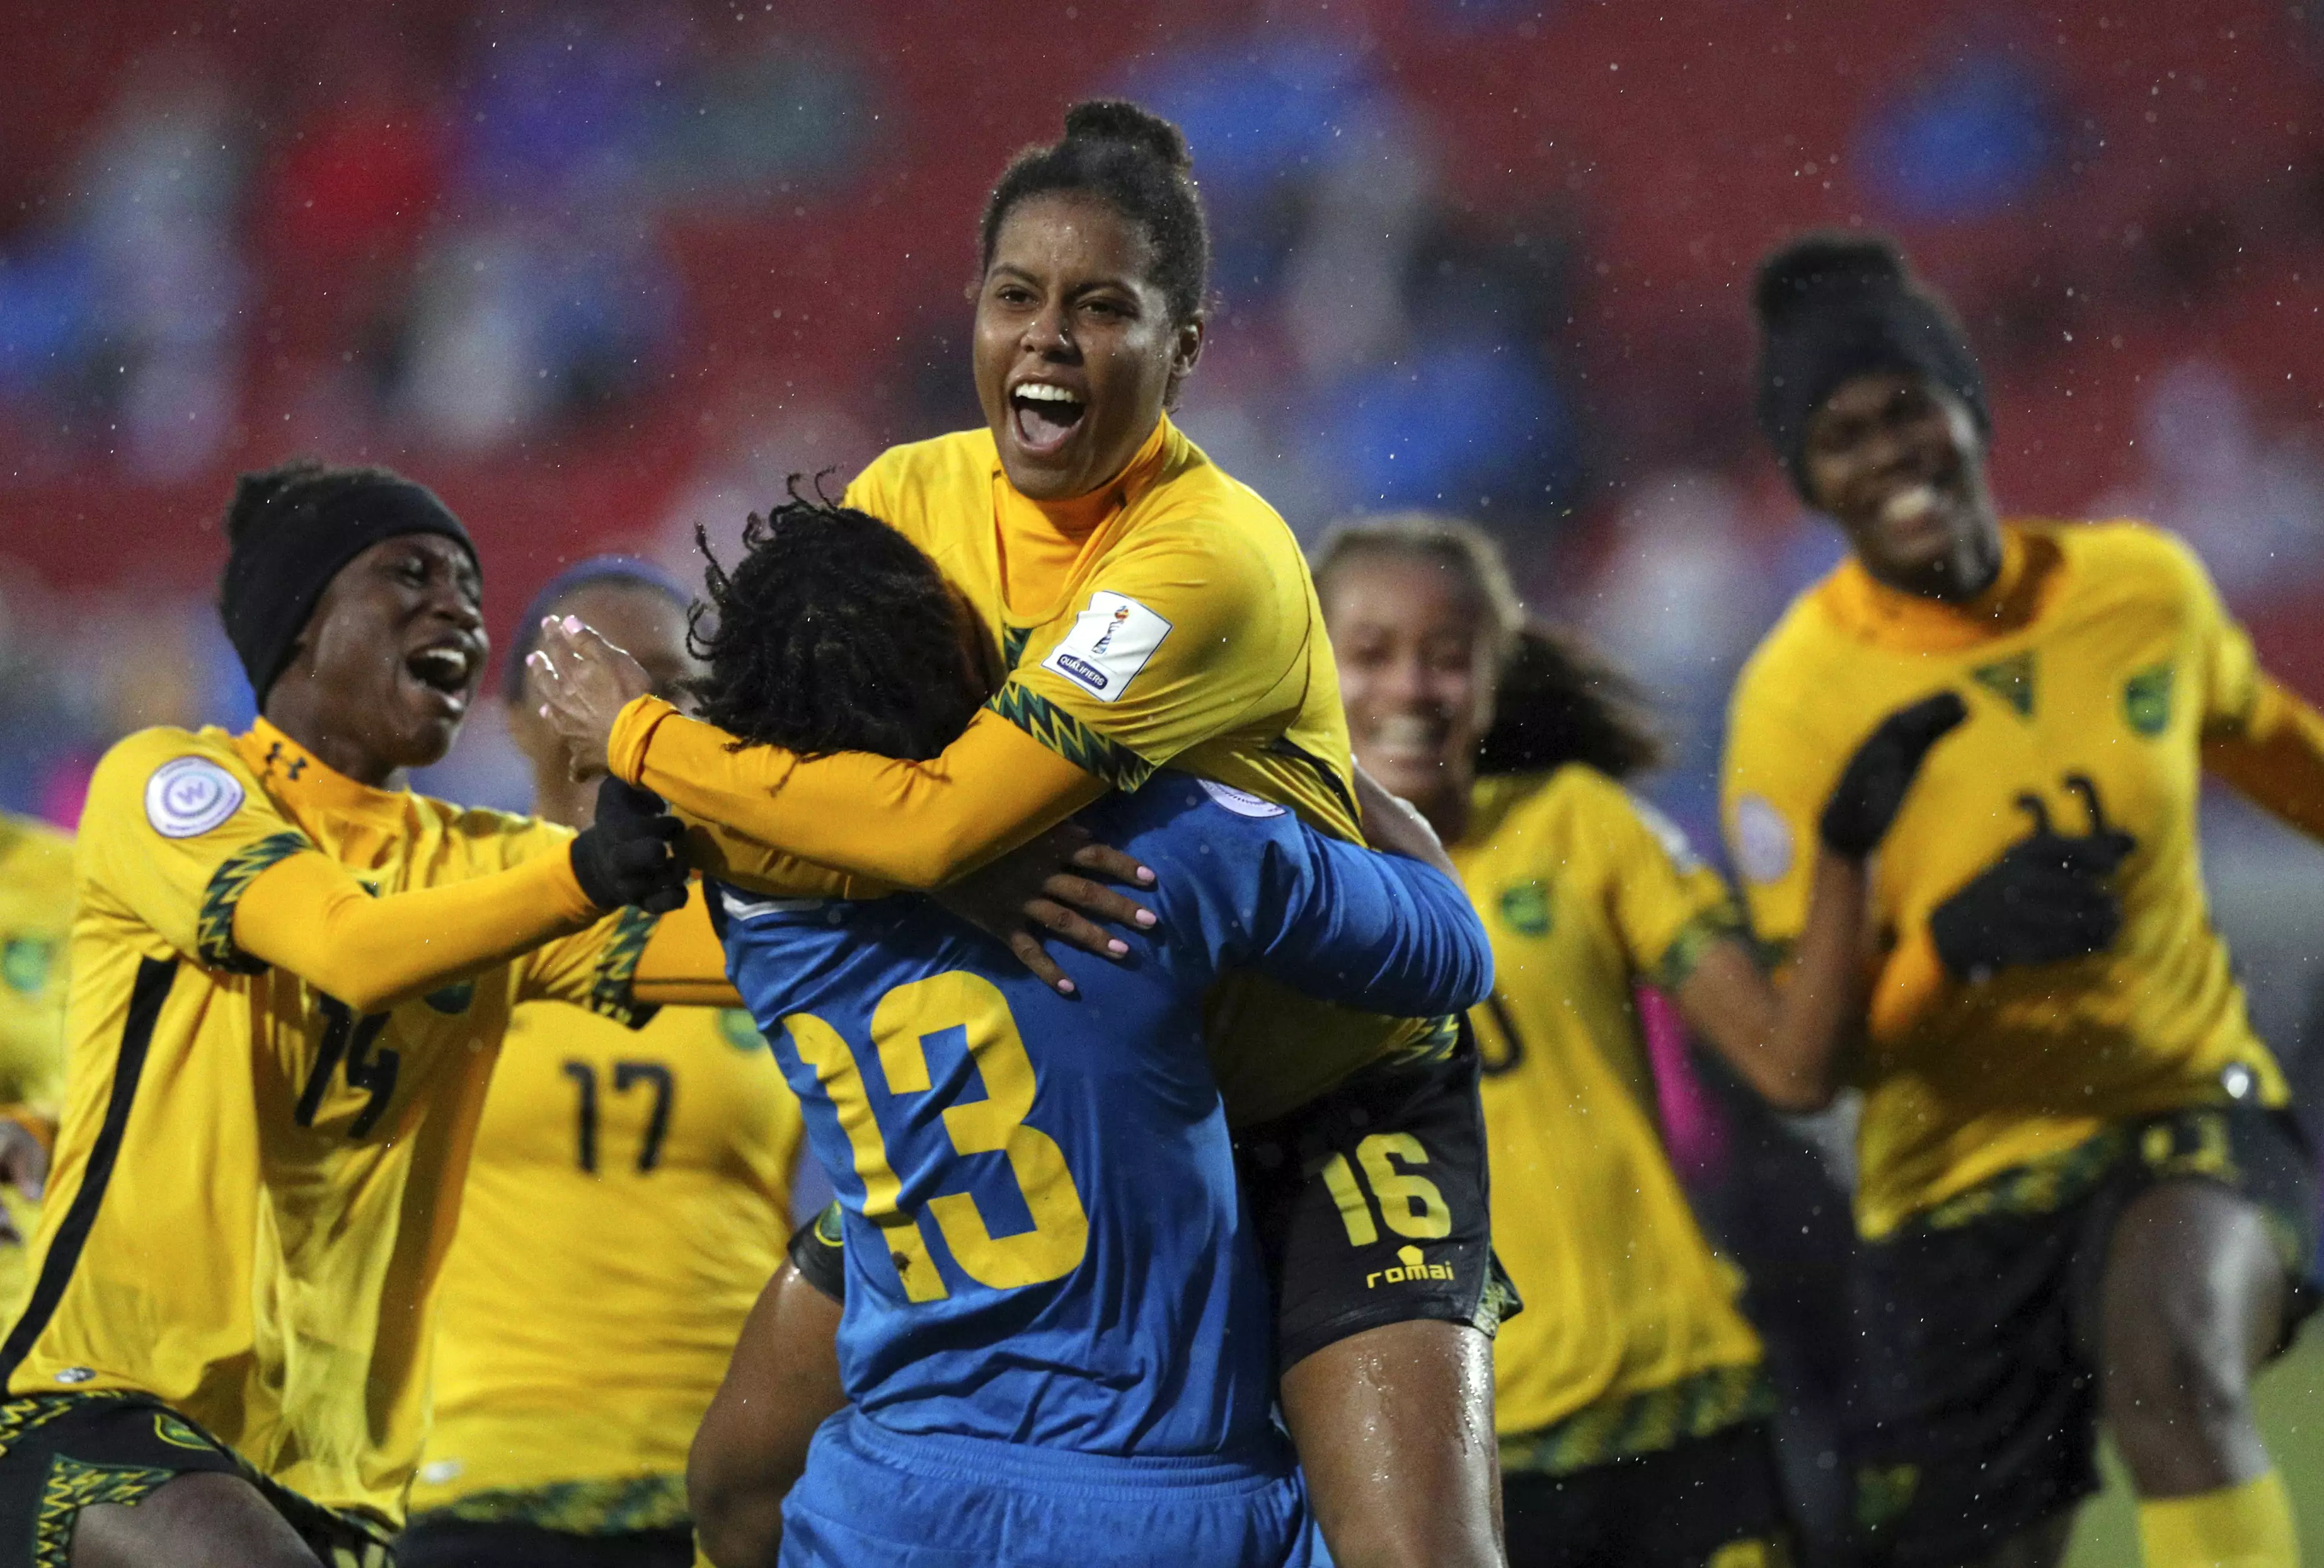 Jamaica's 'Reggae Girlz' are making their first appearance at the Women's World Cup